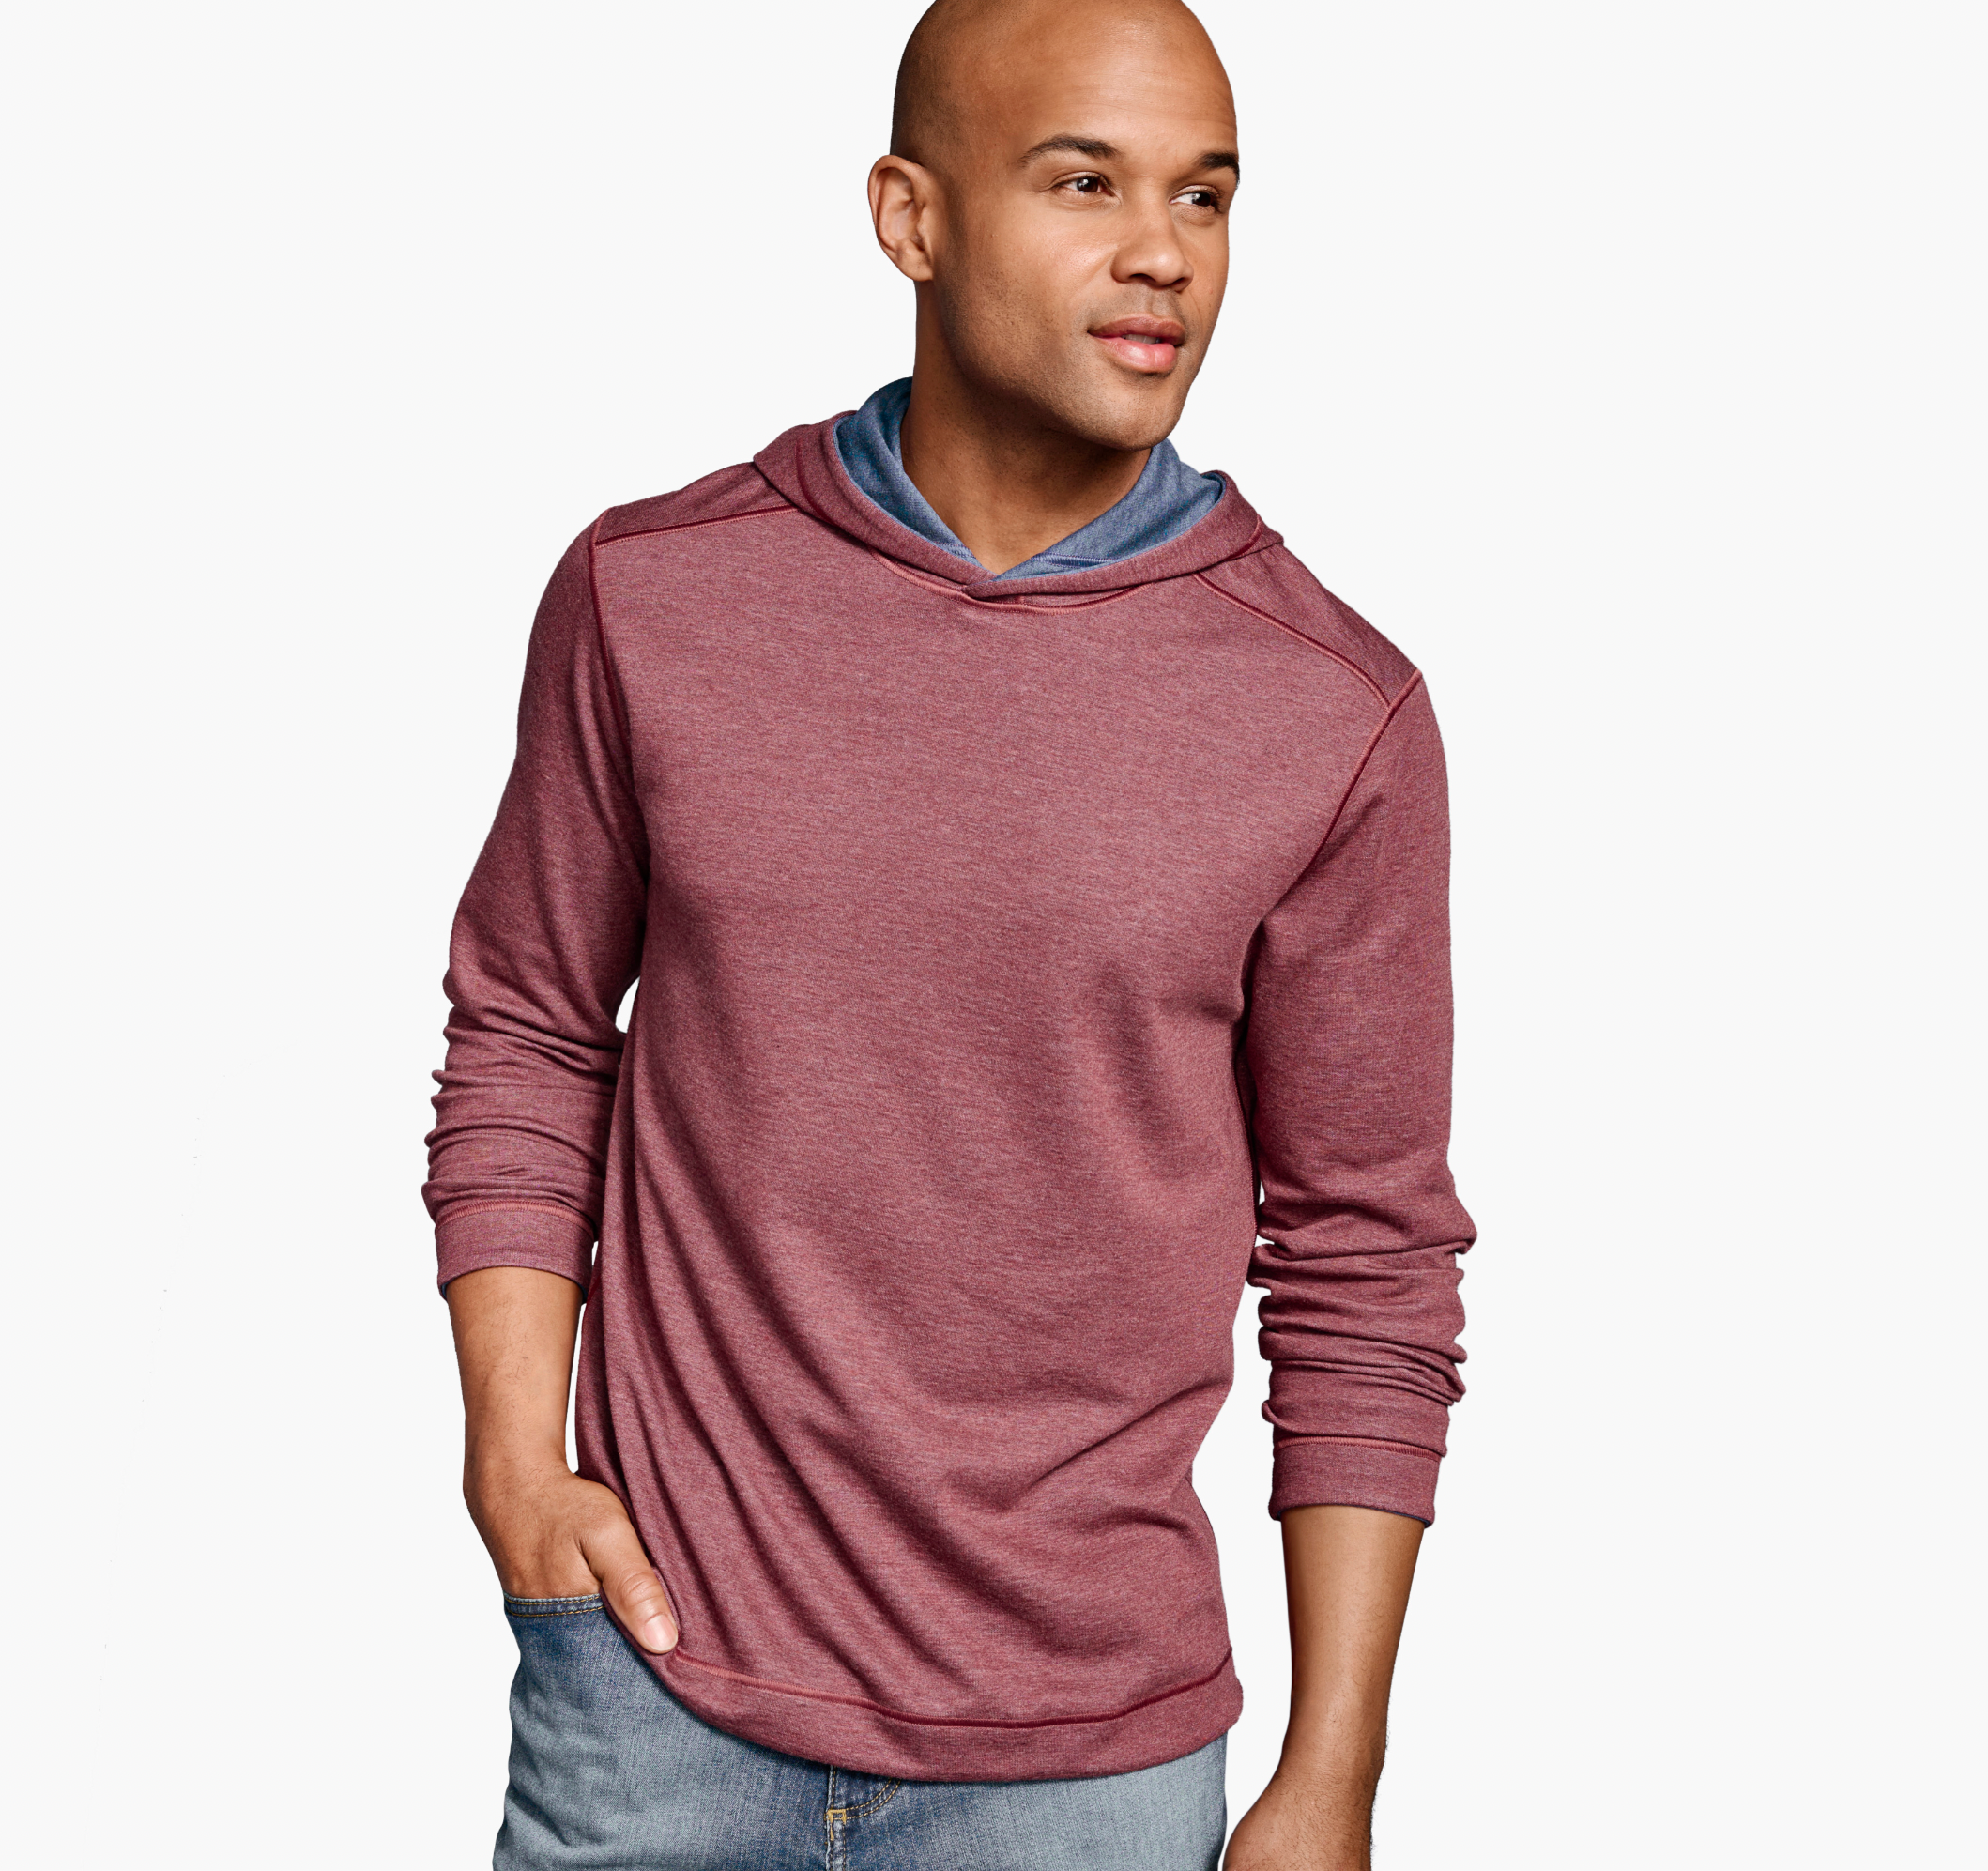 Stay warm and comfortable in style with the Johnston & Murphy Reversible Knit Hoodie. Crafted from a unique, reversible knit fabric, this hoodie offers dual looks to suit your mood.